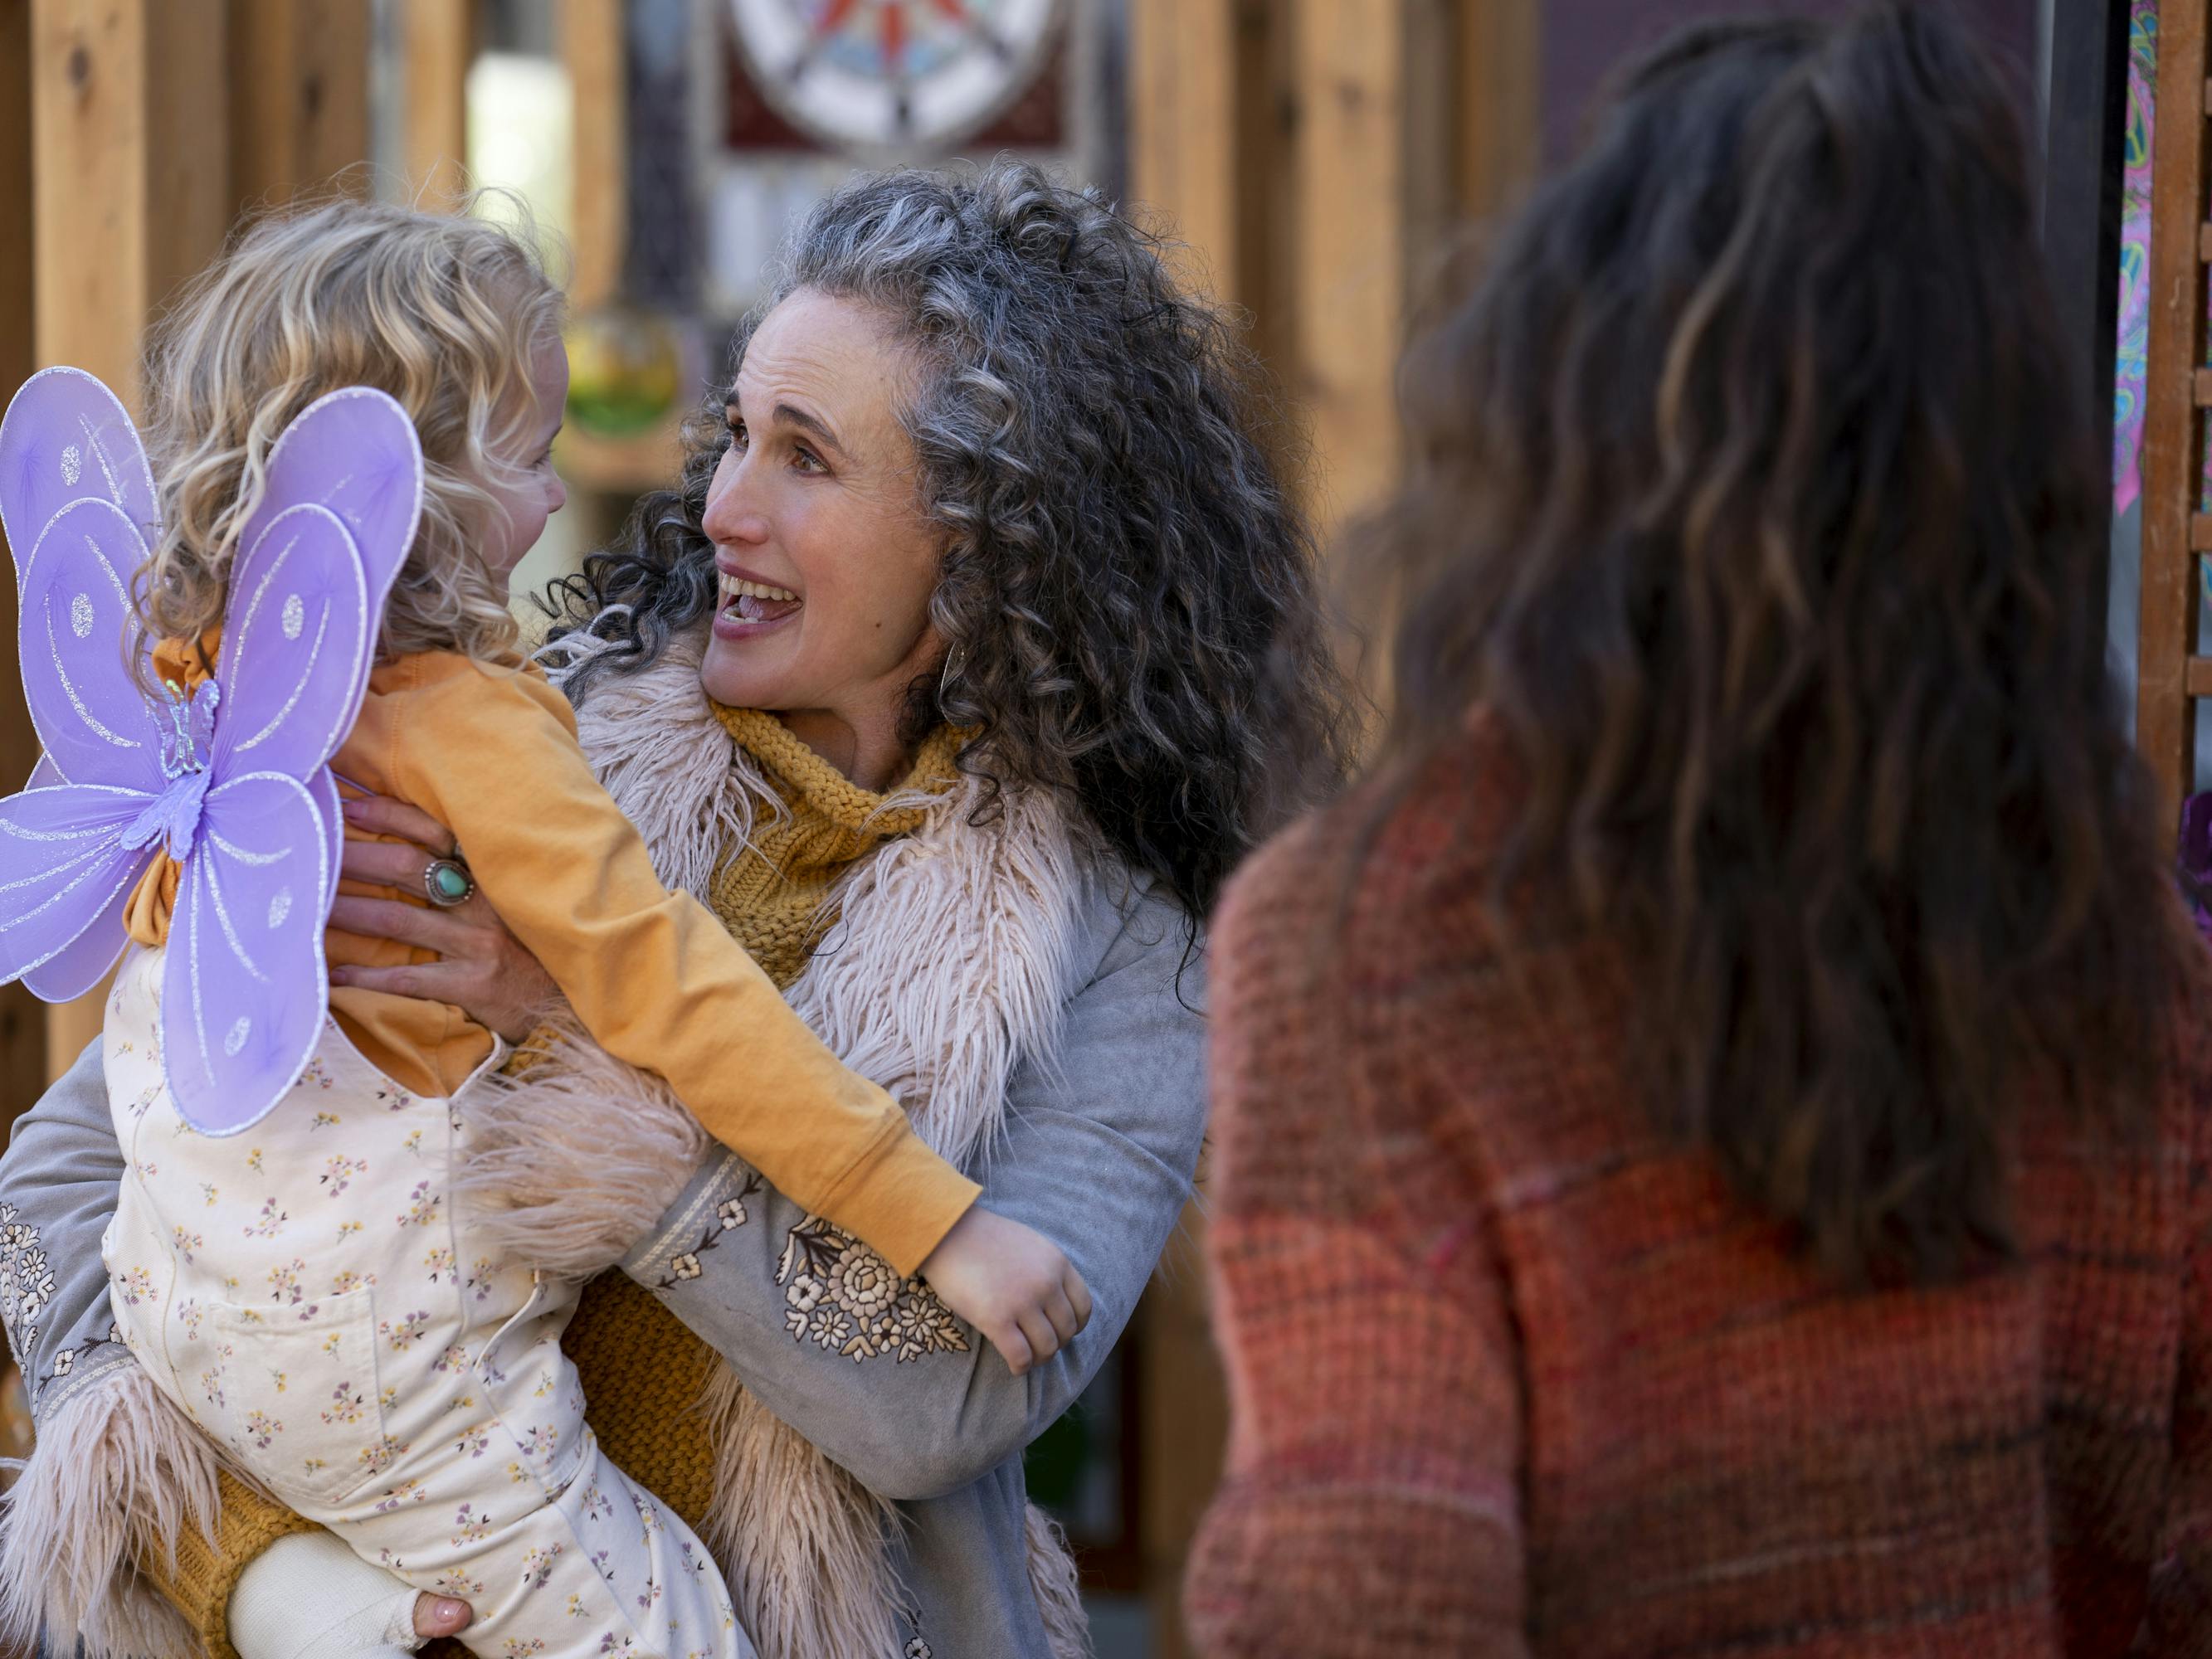 Andie MacDowell, Rylea Nevaeh Whittet, and Margaret Qualley in Maid. MacDowell wears a furry jacket, Whittet wears purple fairy wings, and Qualley wears a red sweater.